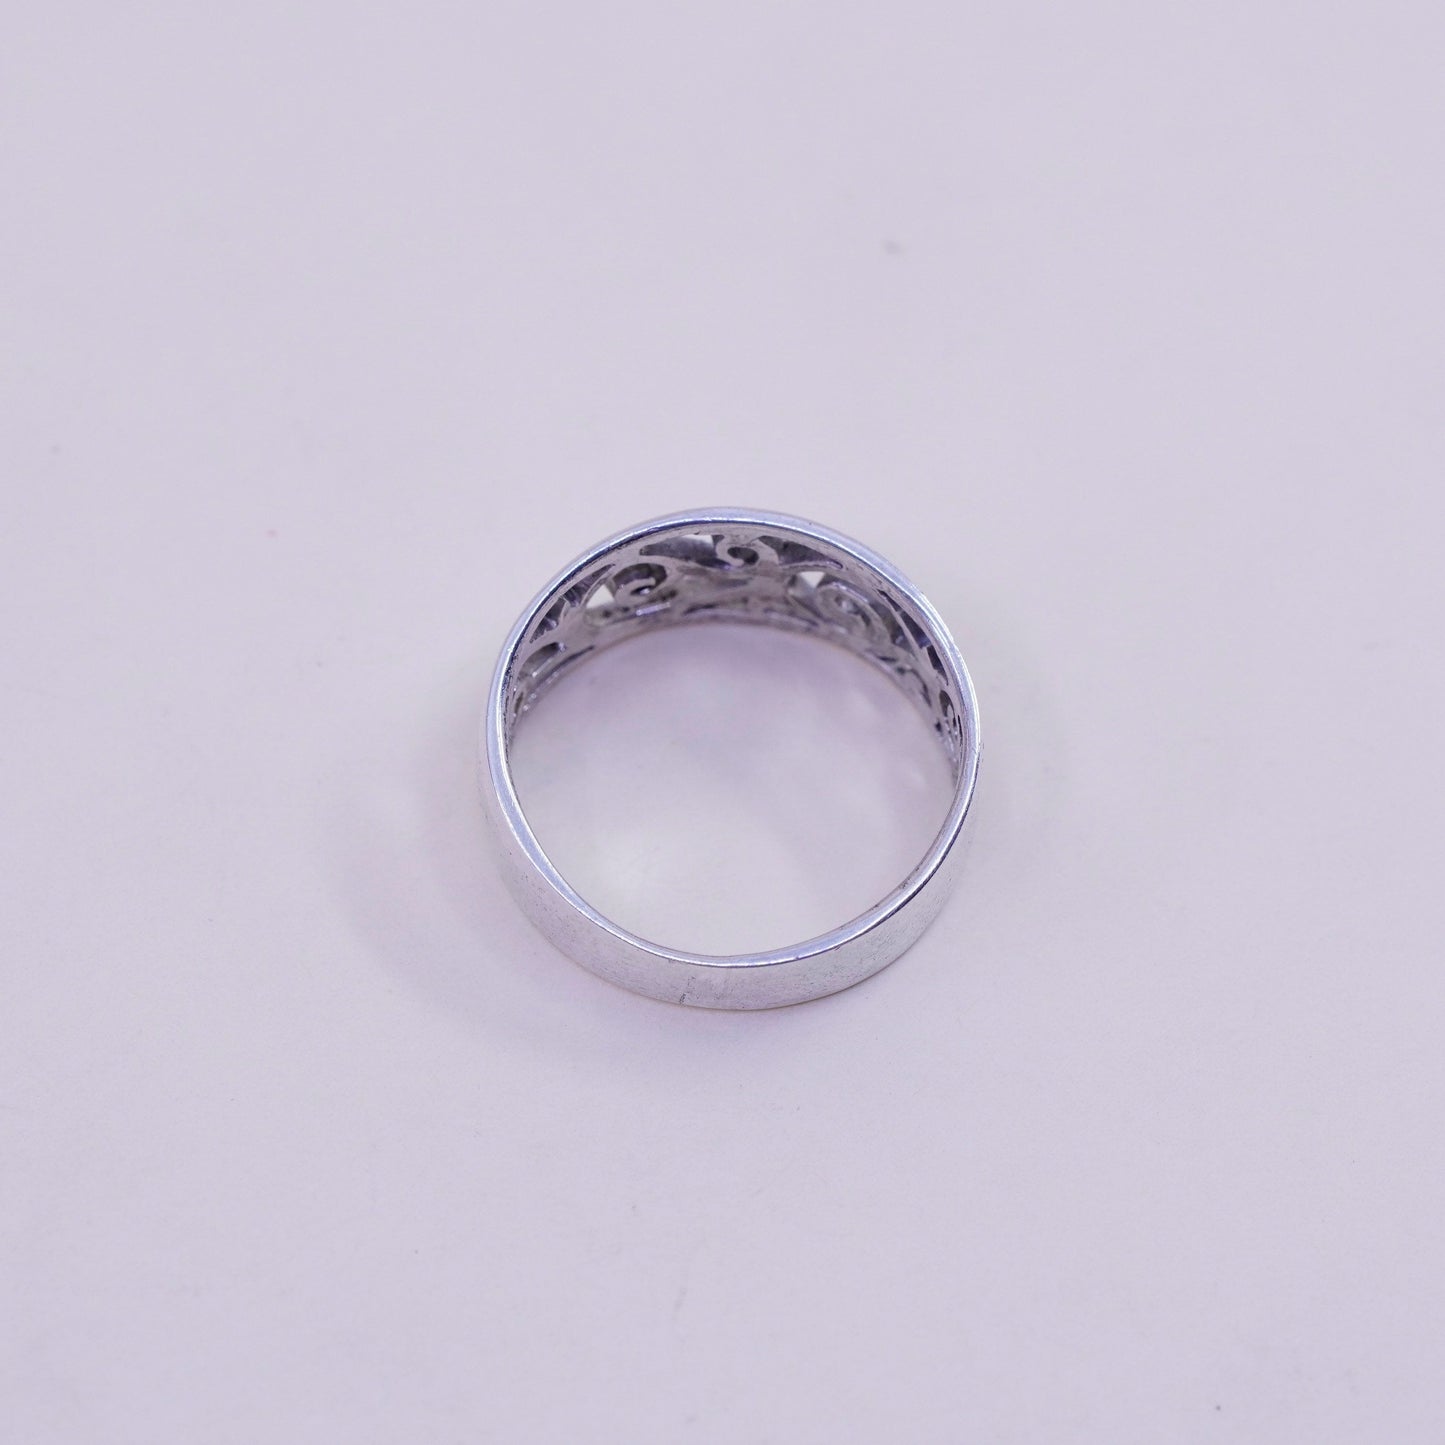 Size 6.5, vintage sterling silver handmade ring, 925 band with whirl filigree